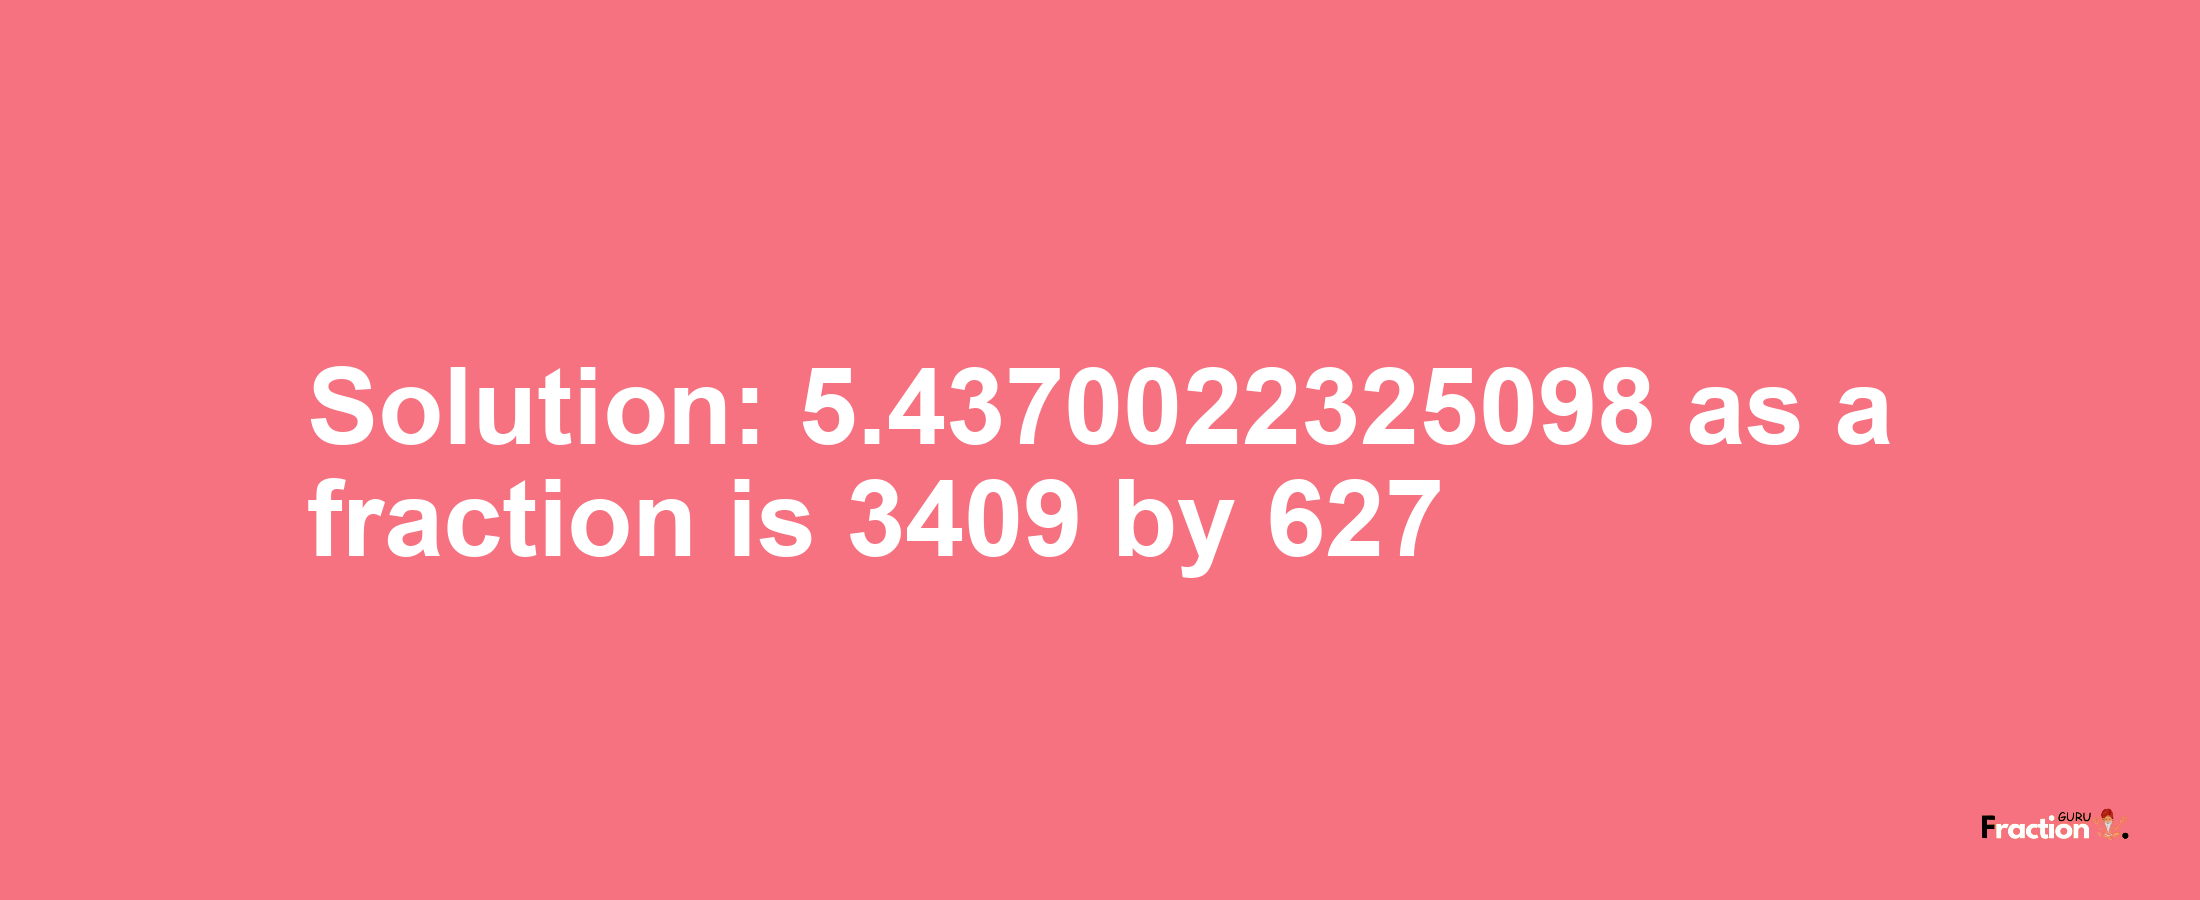 Solution:5.4370022325098 as a fraction is 3409/627